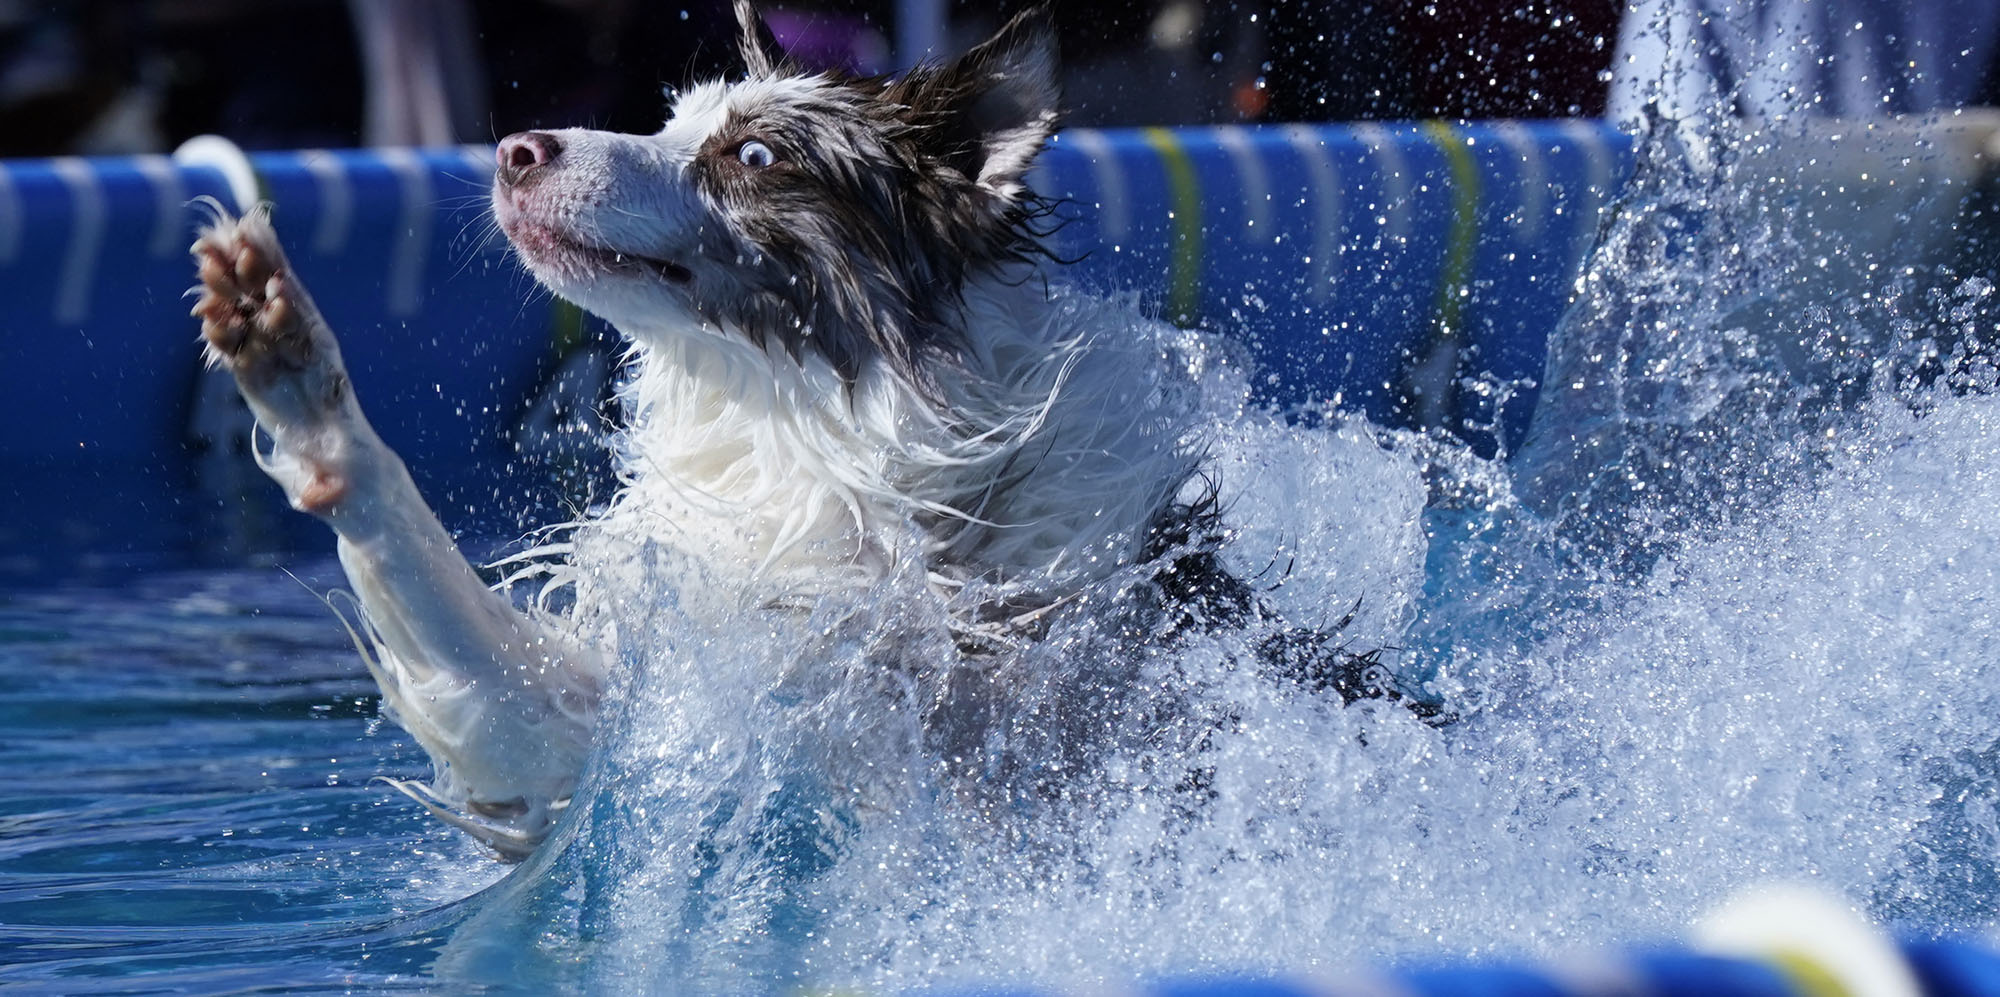 A dog splashes down during the Dock Diving event at the 148th annual Westminster Kennel Club Dog Show